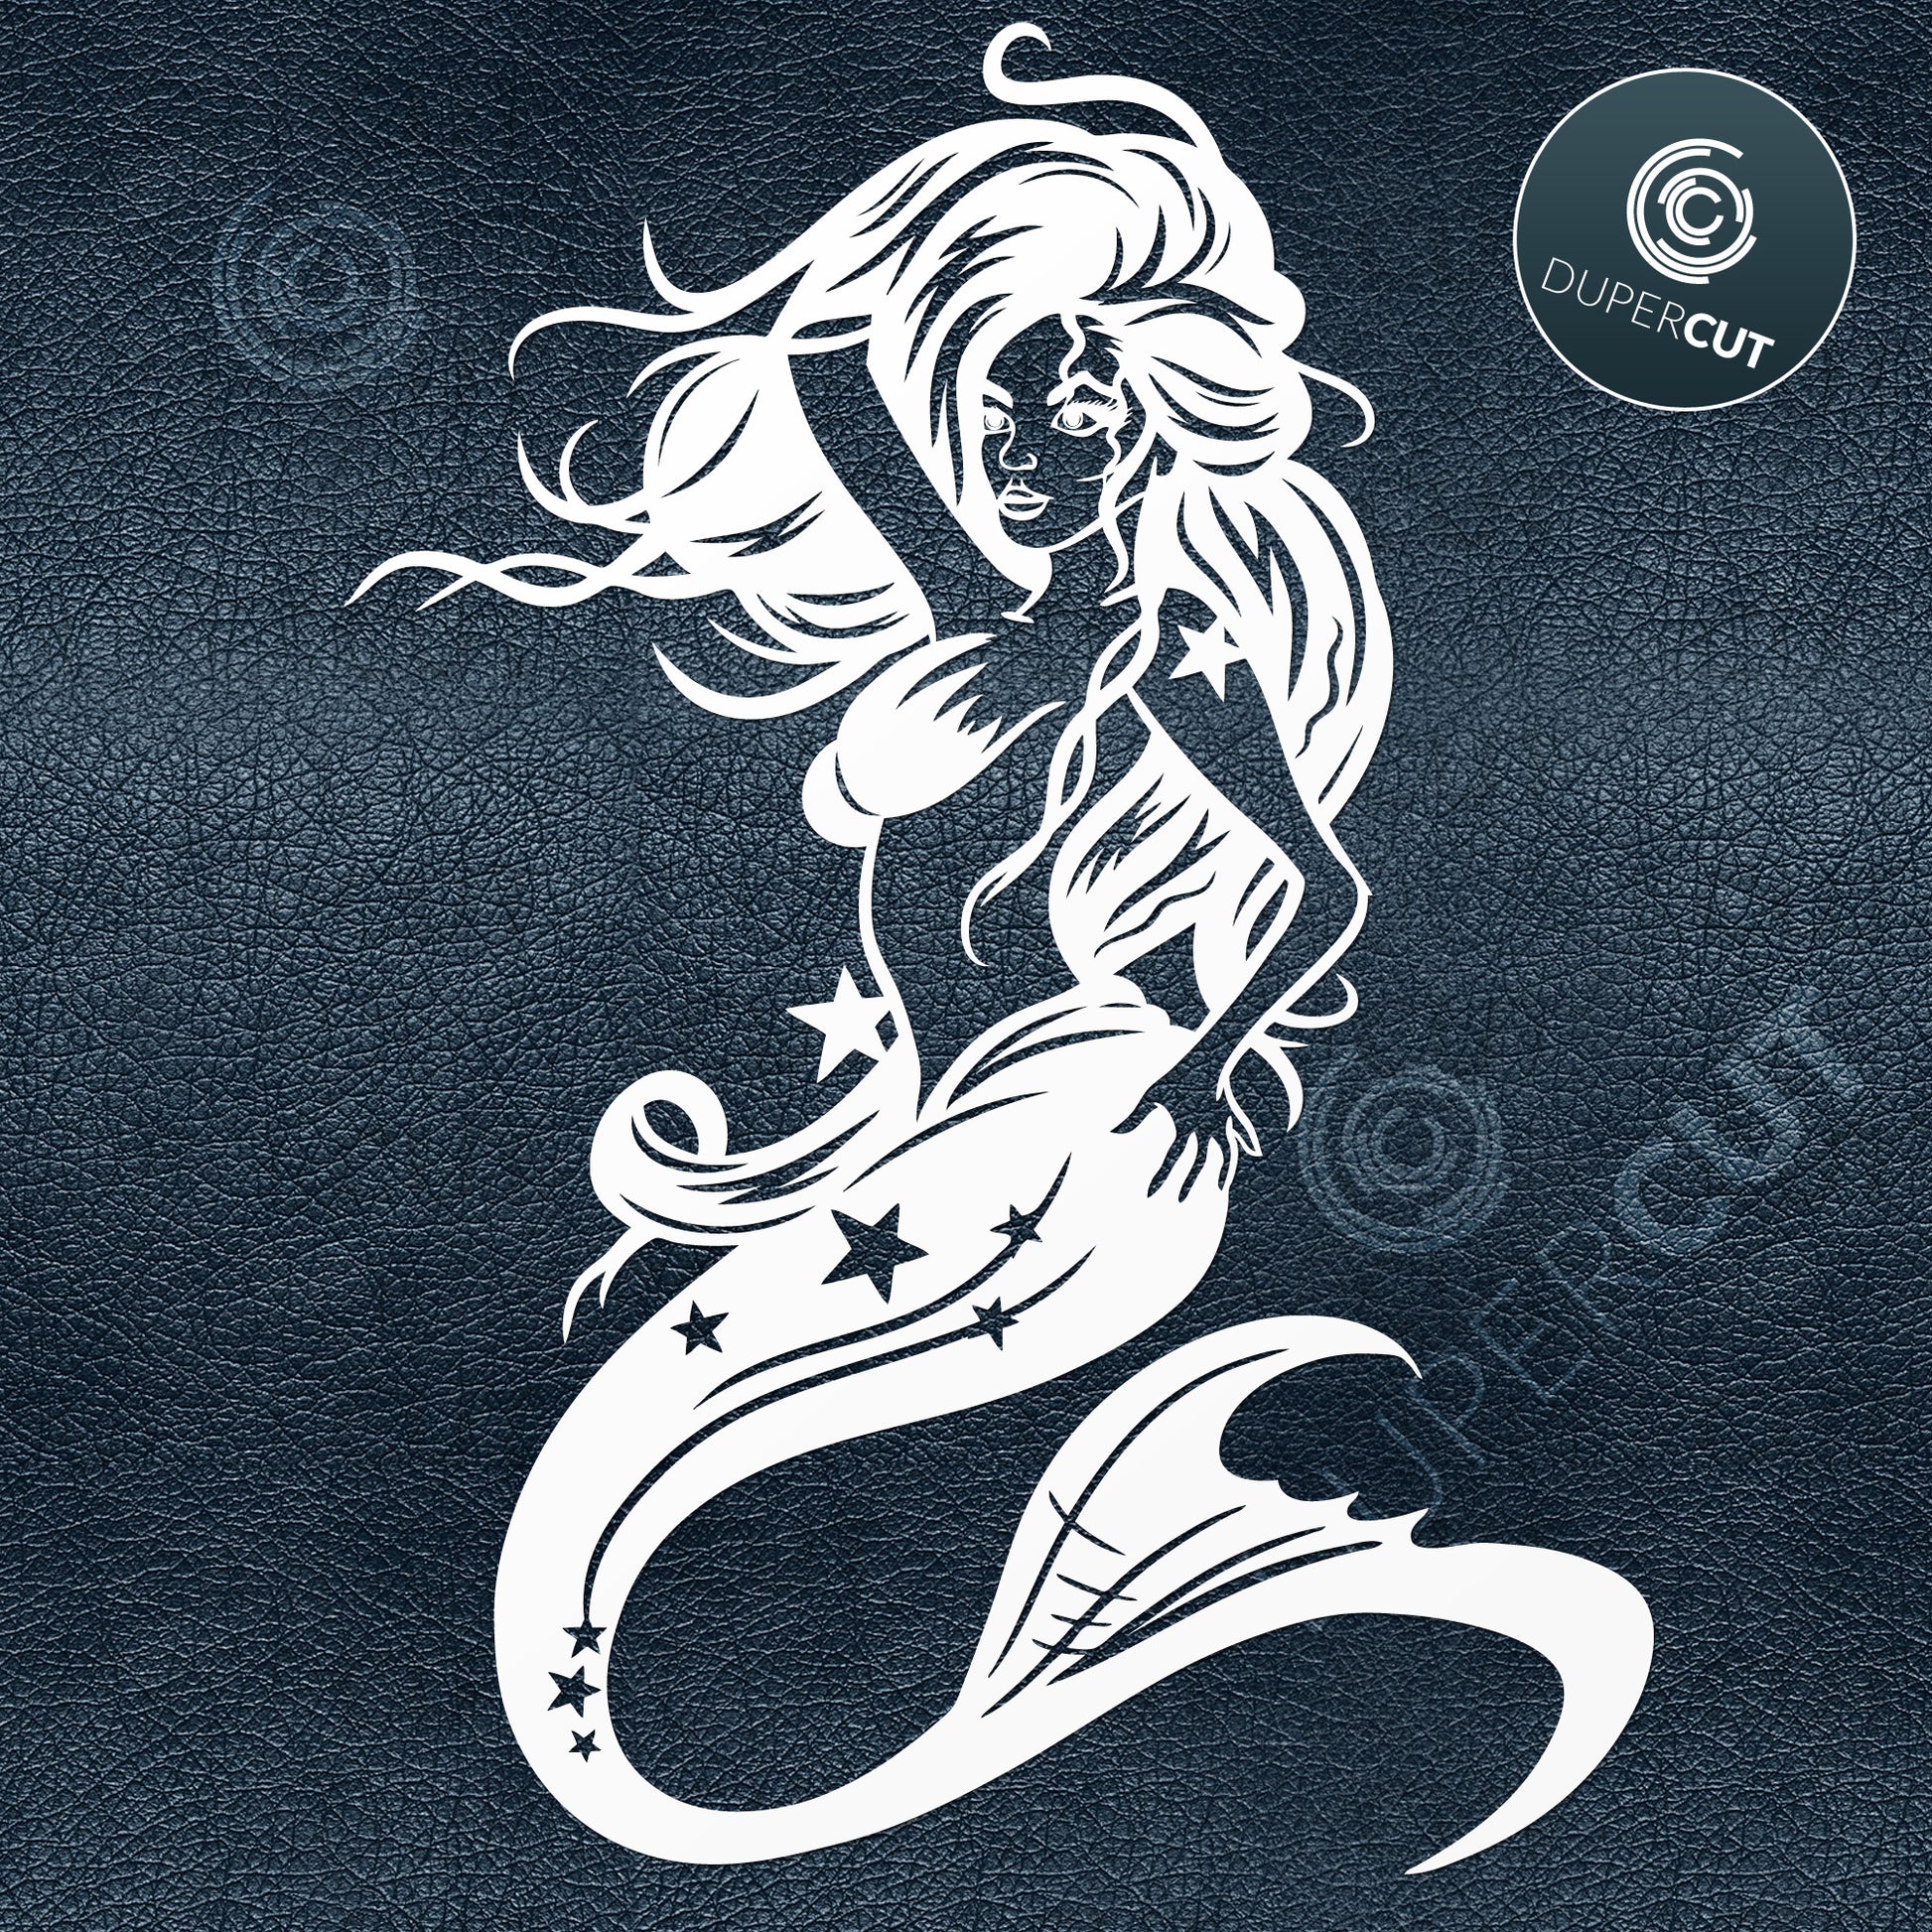 Mermaid siren, tattoo style. SVG JPEG DXF files. Template for paper cutting, laser, print on demand. For use with Cricut, Glowforge, Silhouette Cameo, CNC machines. Personal or commercial license.